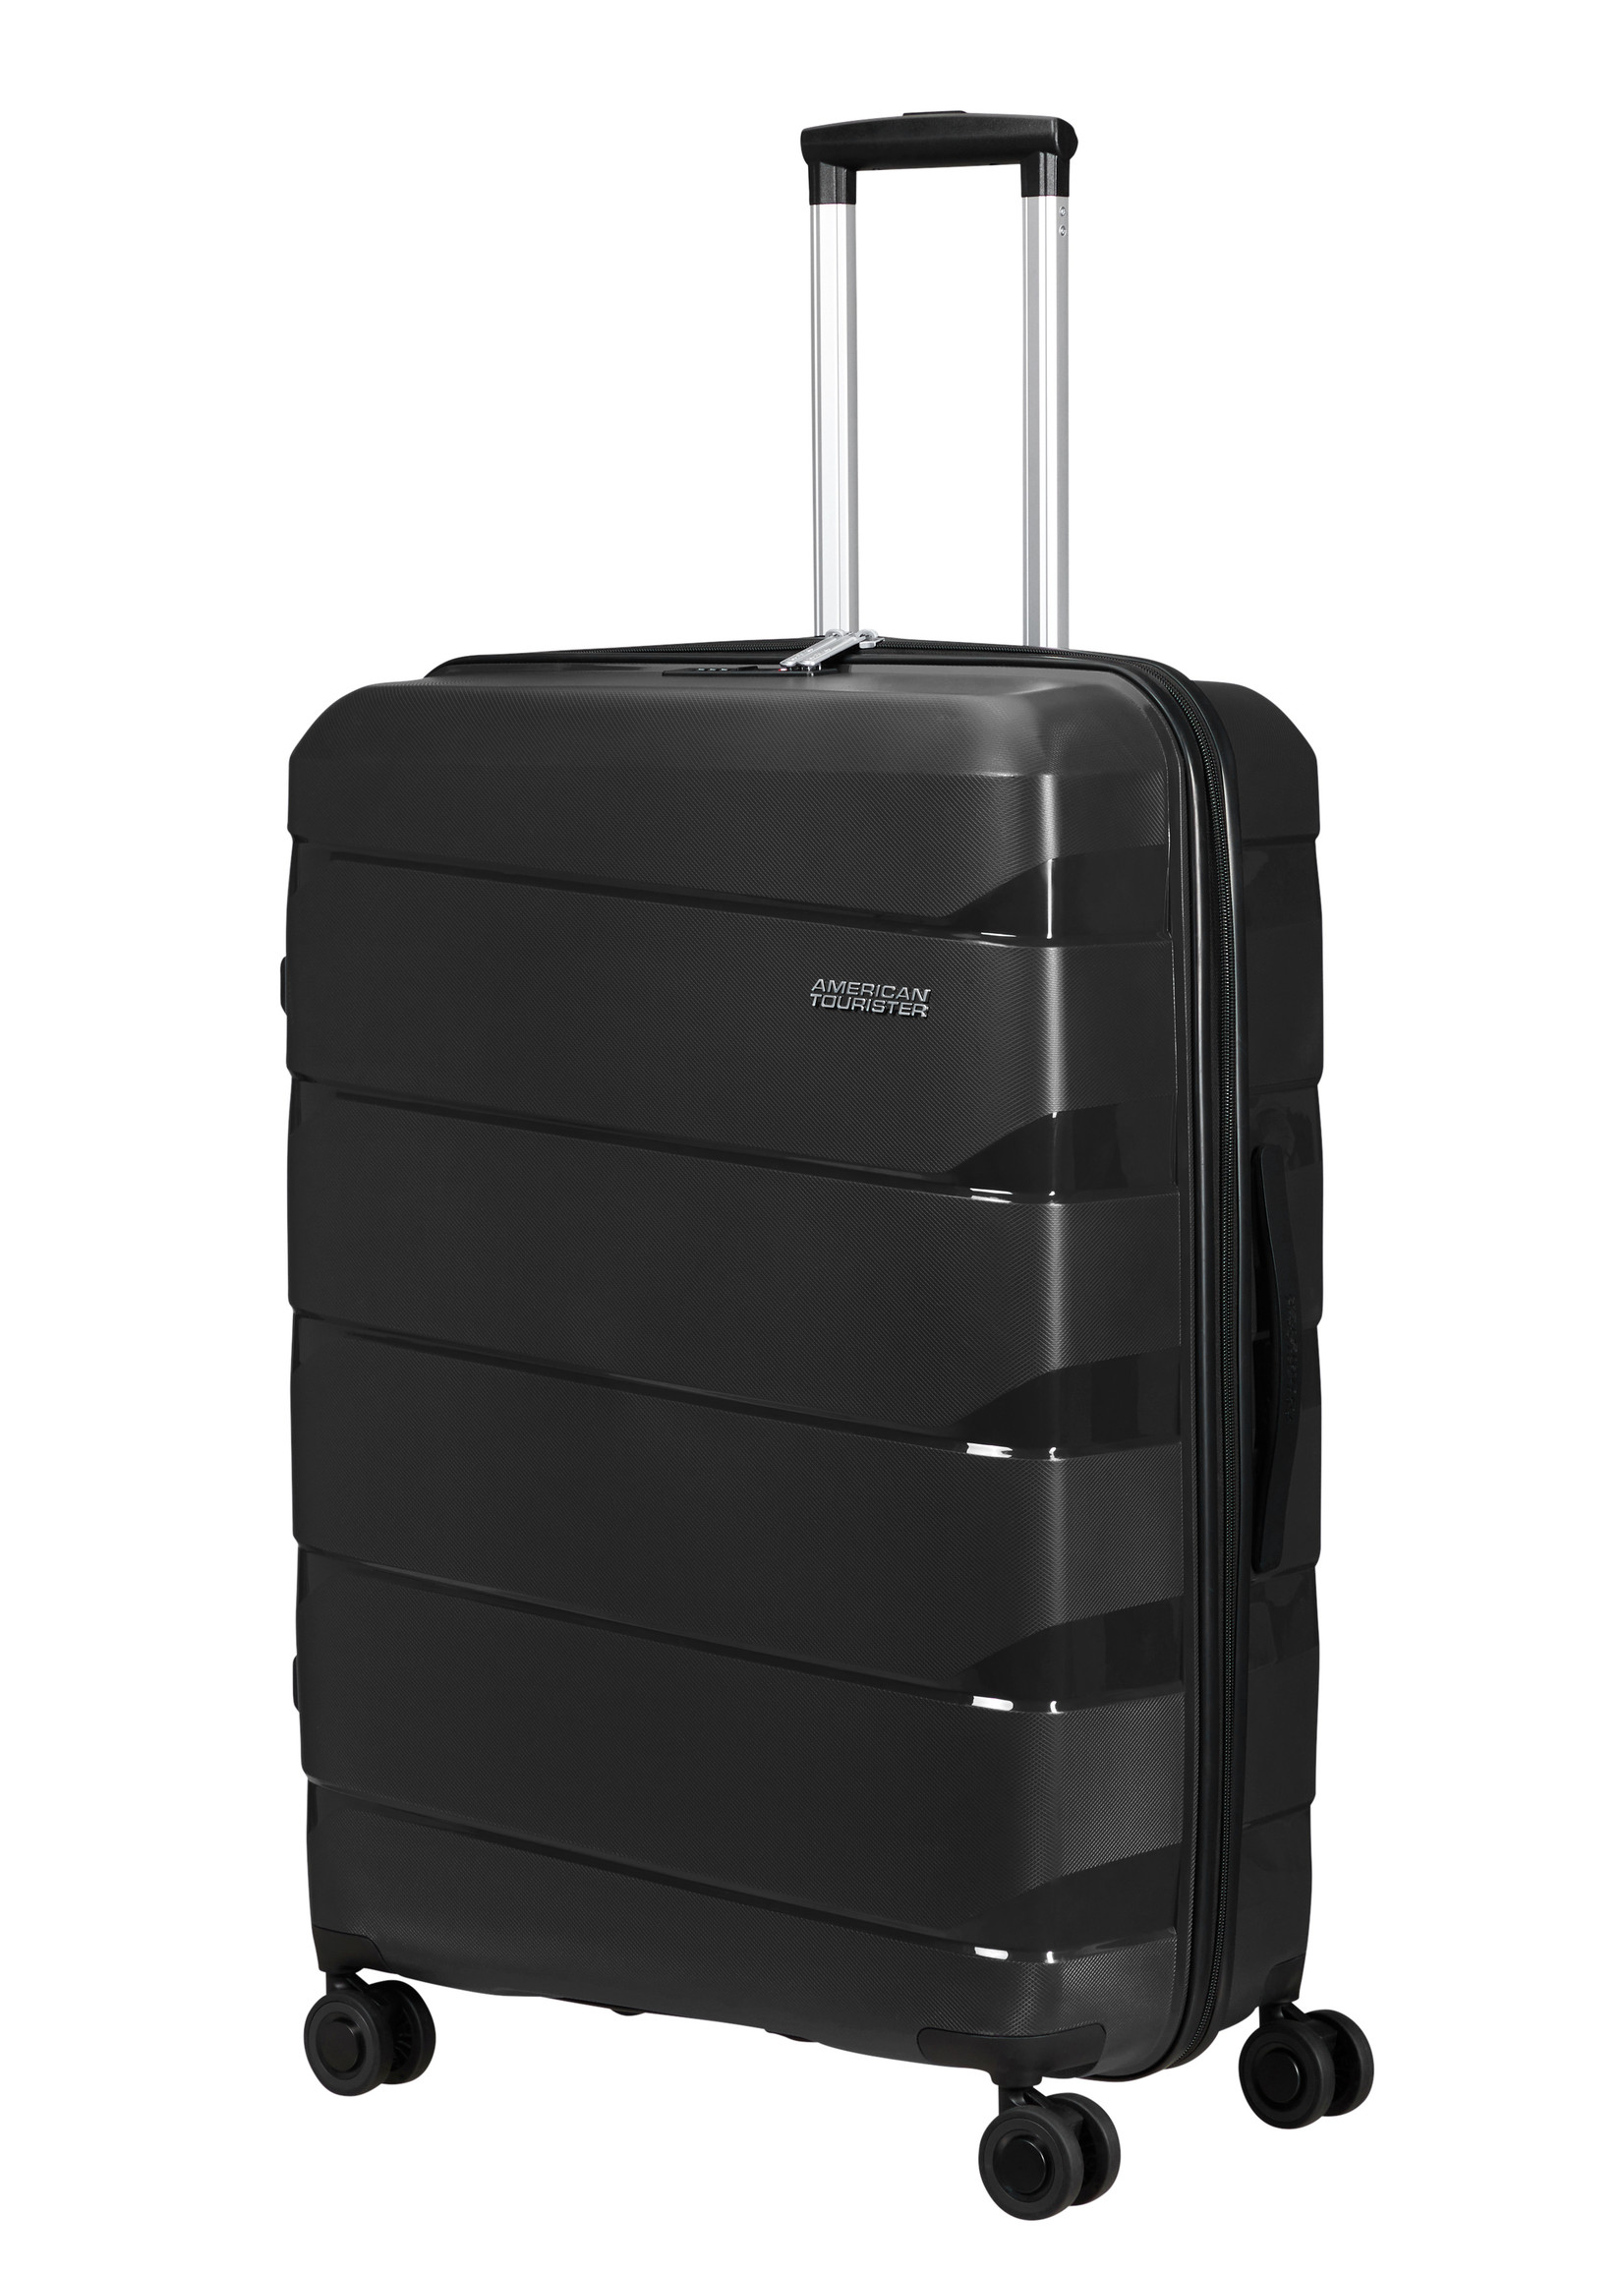 AMERICAN TOURISTER AIR MOVE SPINNER 75 BLACK